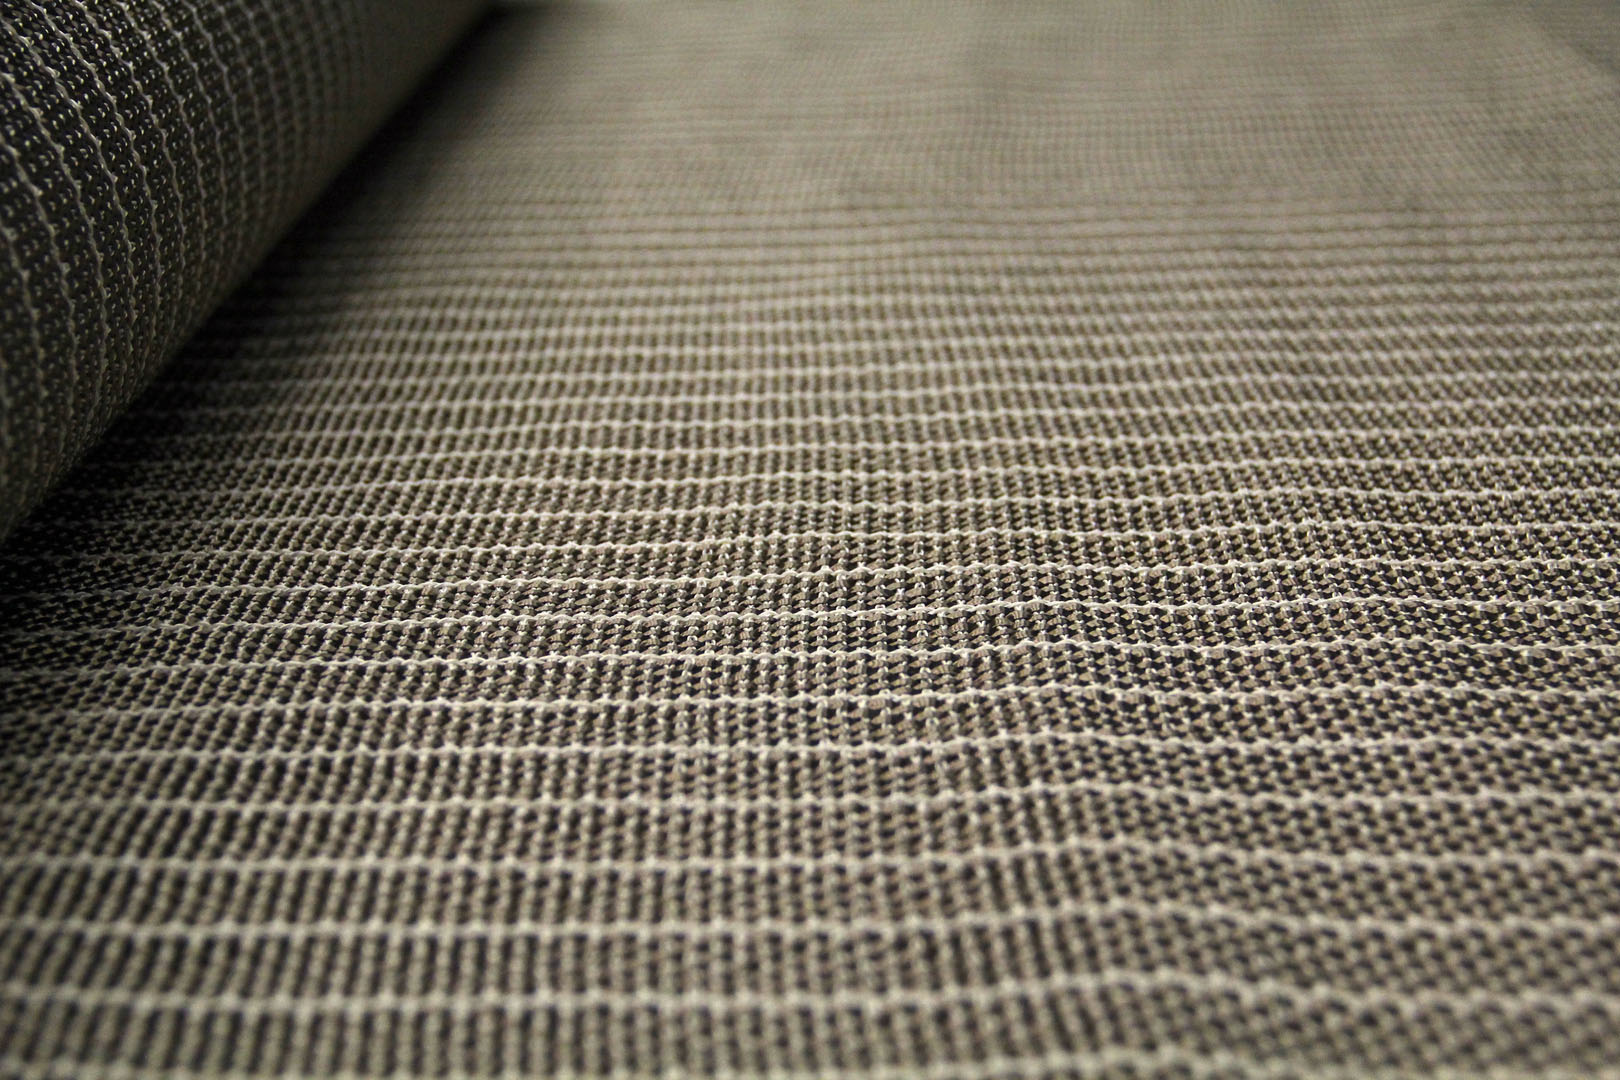 A close up of the fabric on a carpet.